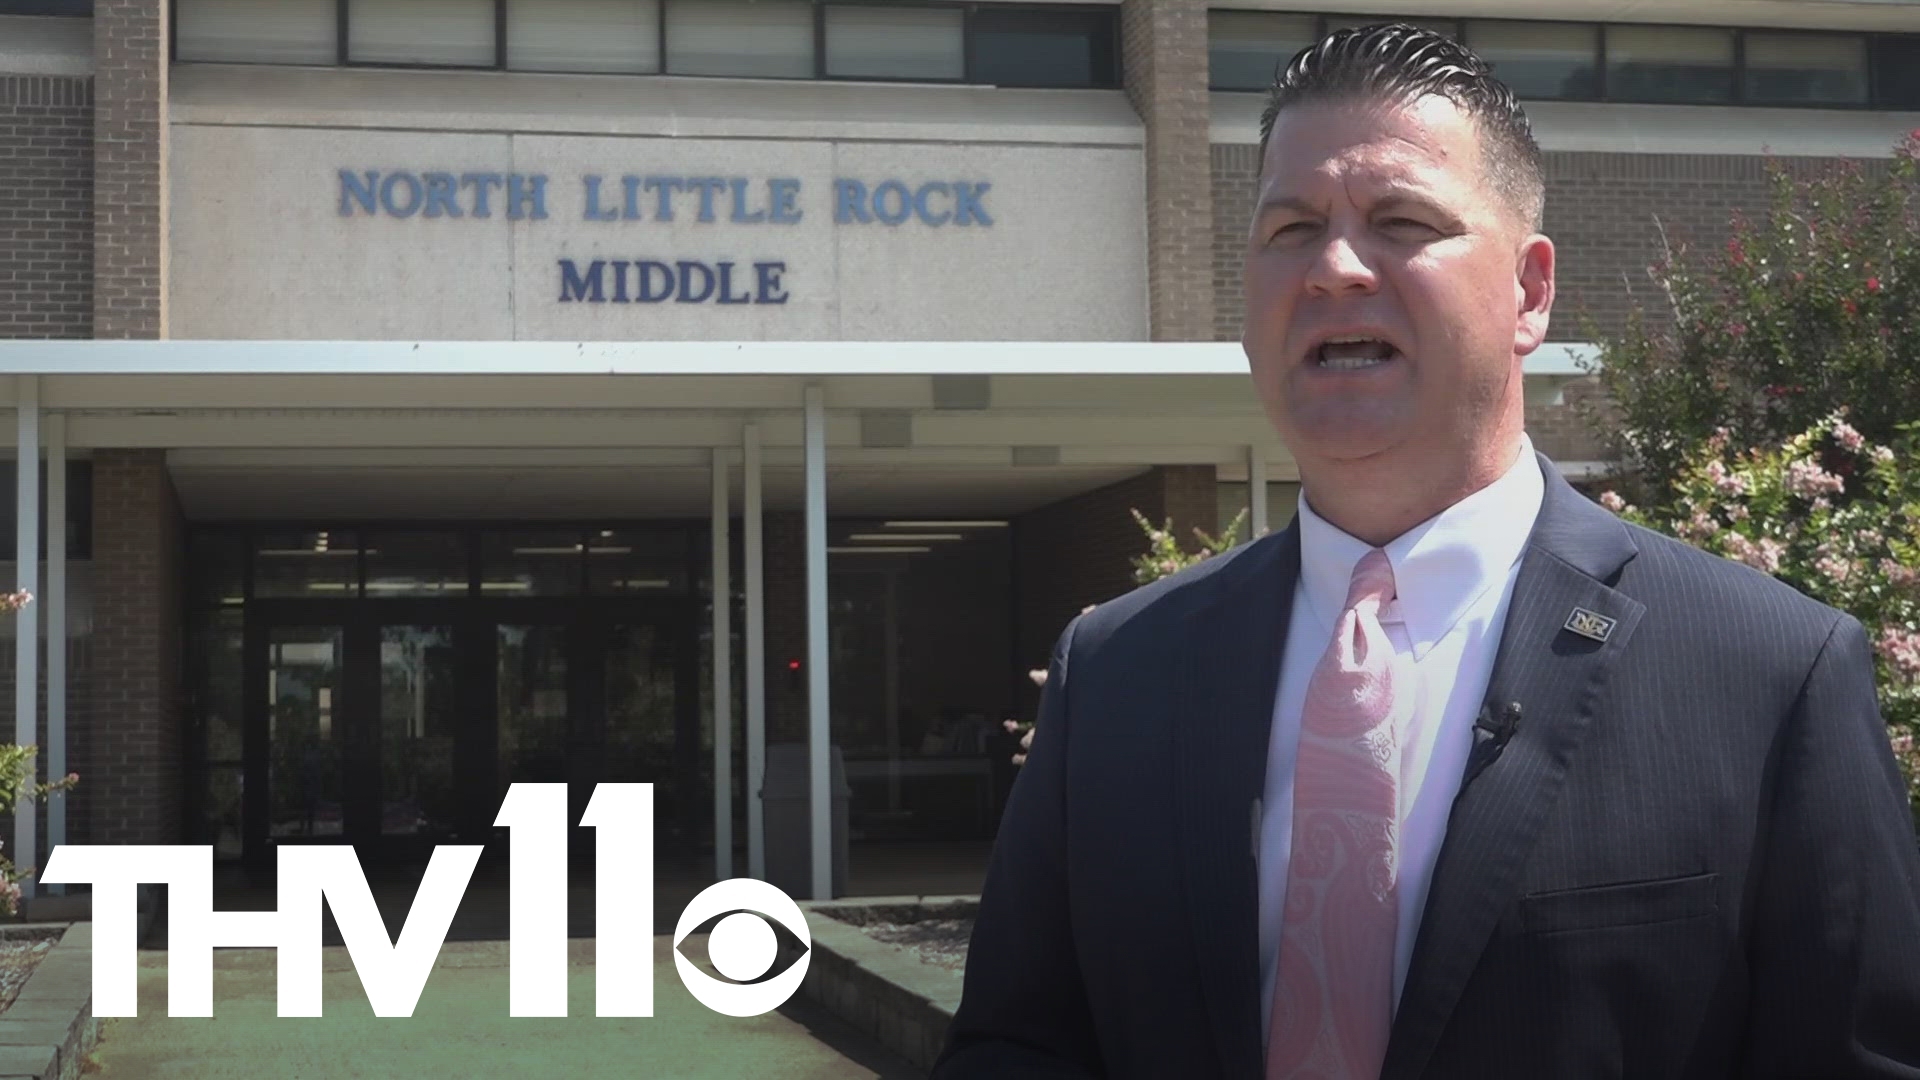 As the North Little Rock School District pushes for changes on their campuses, voters will soon be able to decide whether to raise the millage rate by 4 mills.